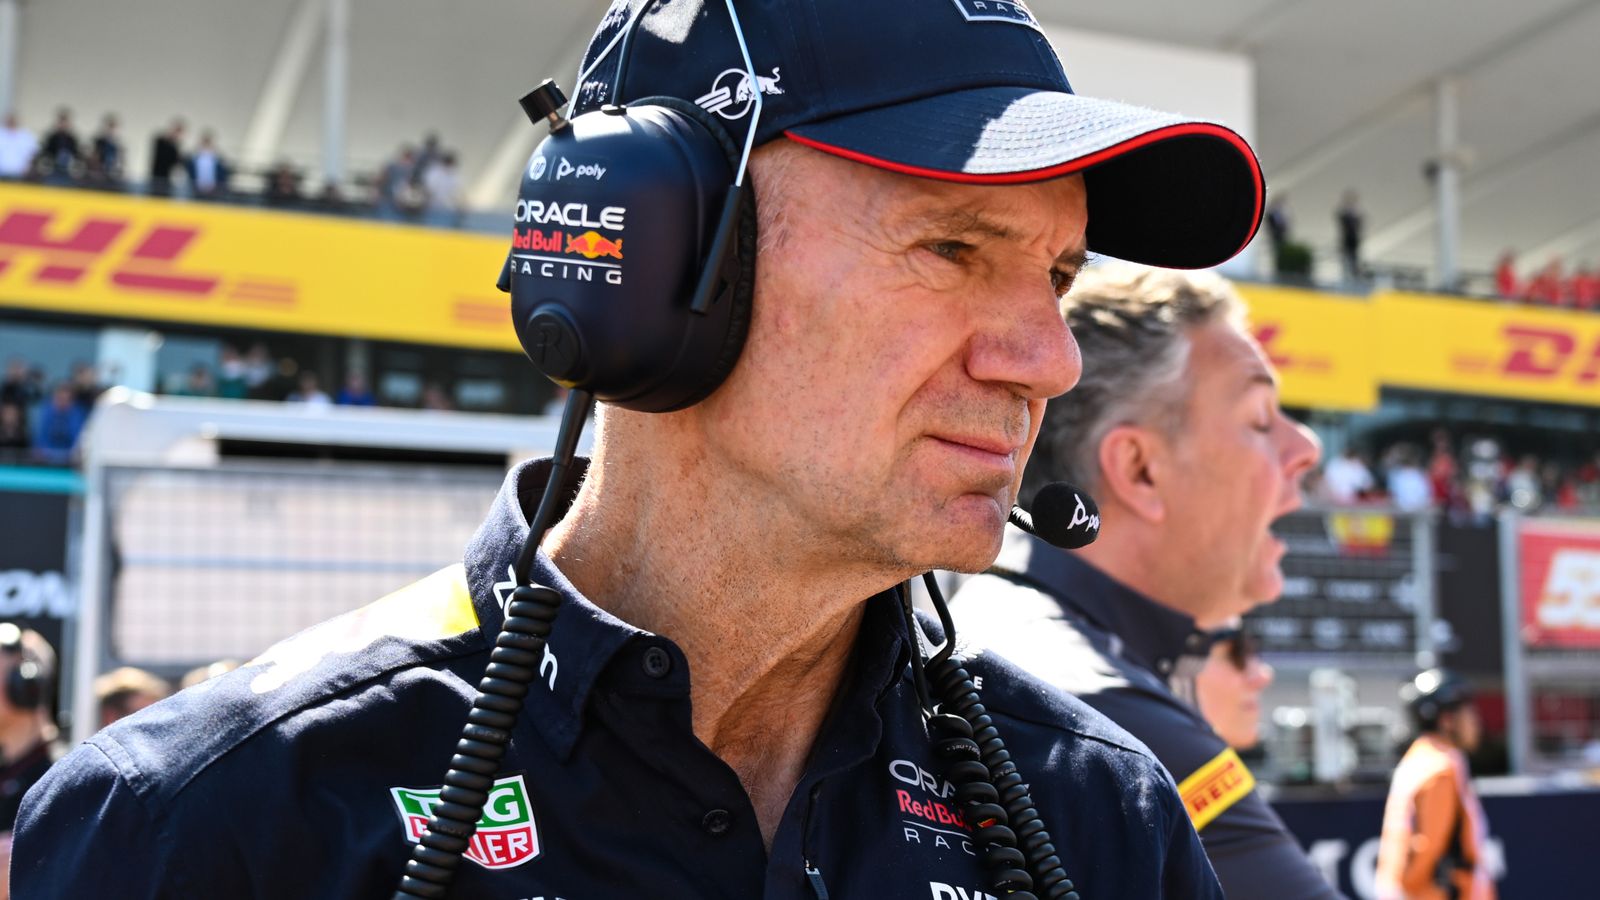 Adrian Newey, F1's serial title-winning designer, decides to leave Red Bull after nearly two decades